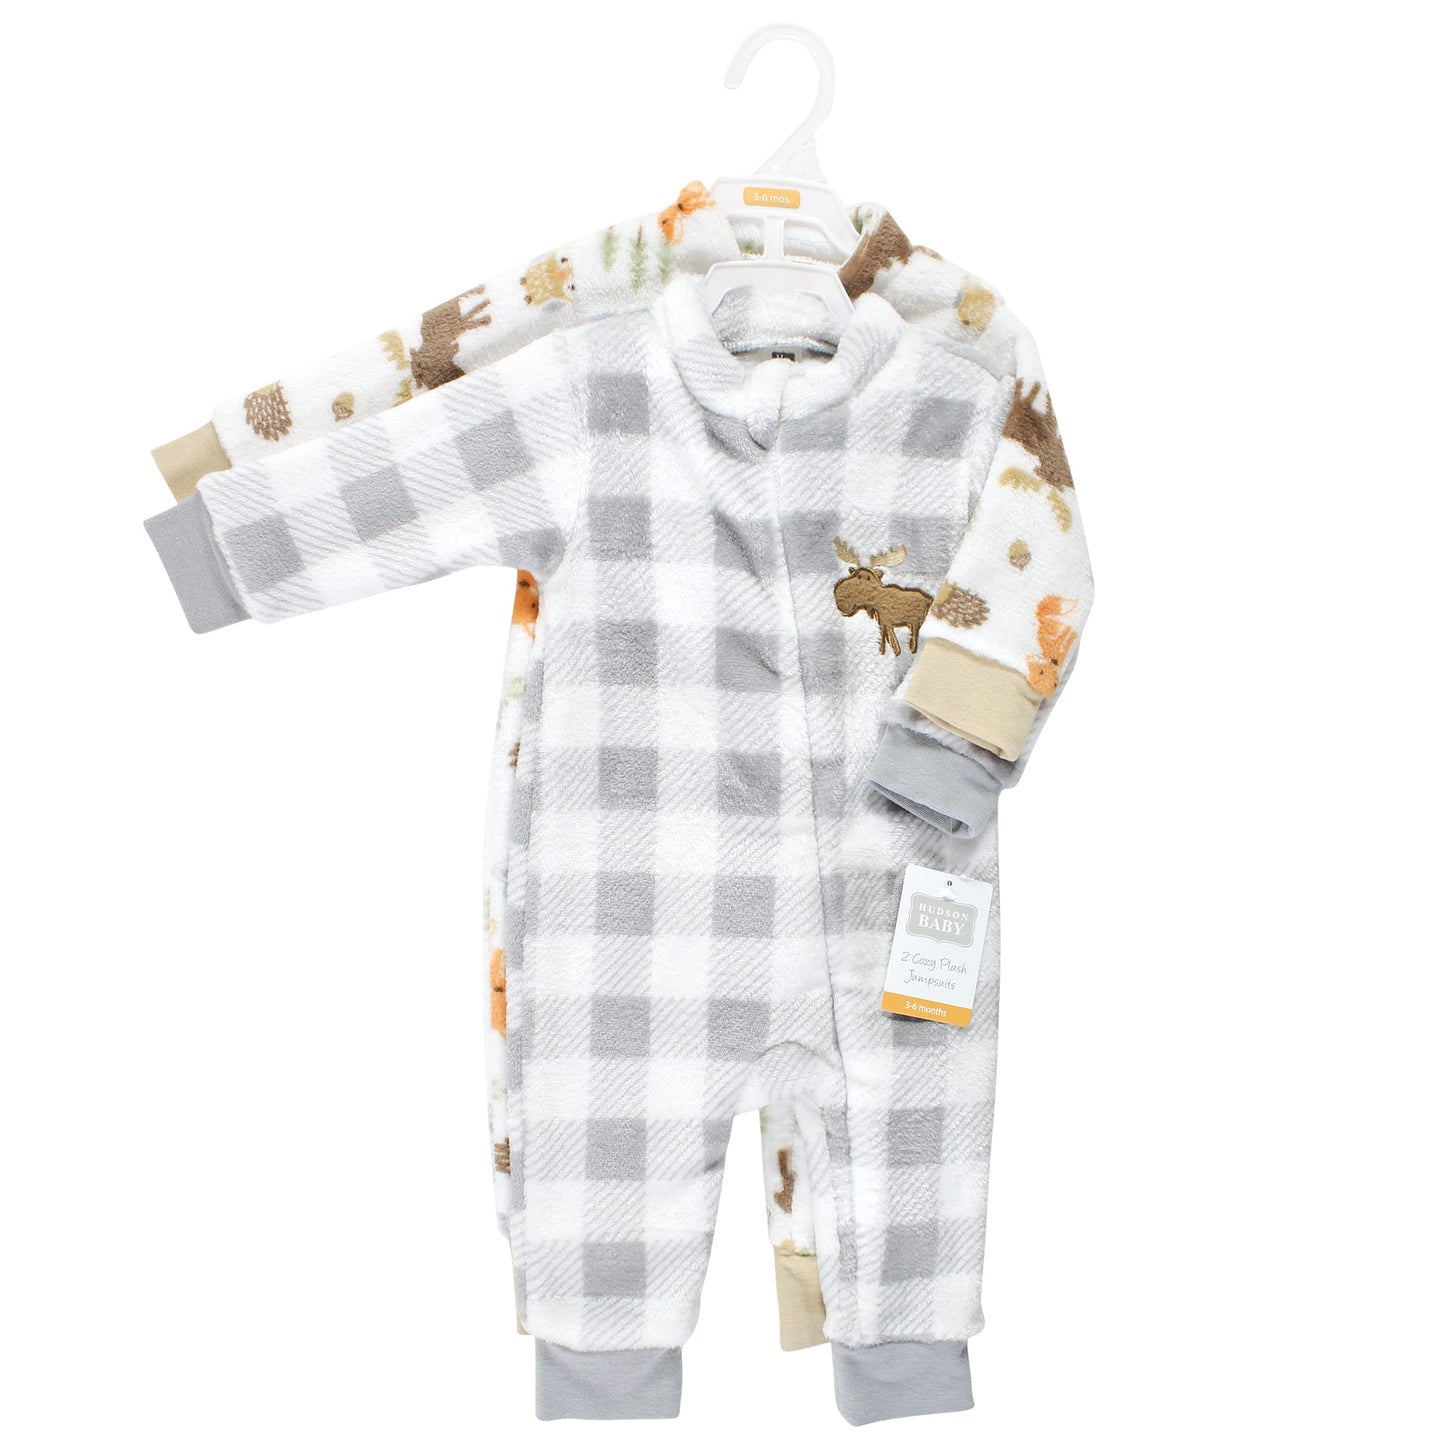 Hudson Baby Unisex Baby Fleece Jumpsuits, Coveralls, and Playsuits (3-6 Months)